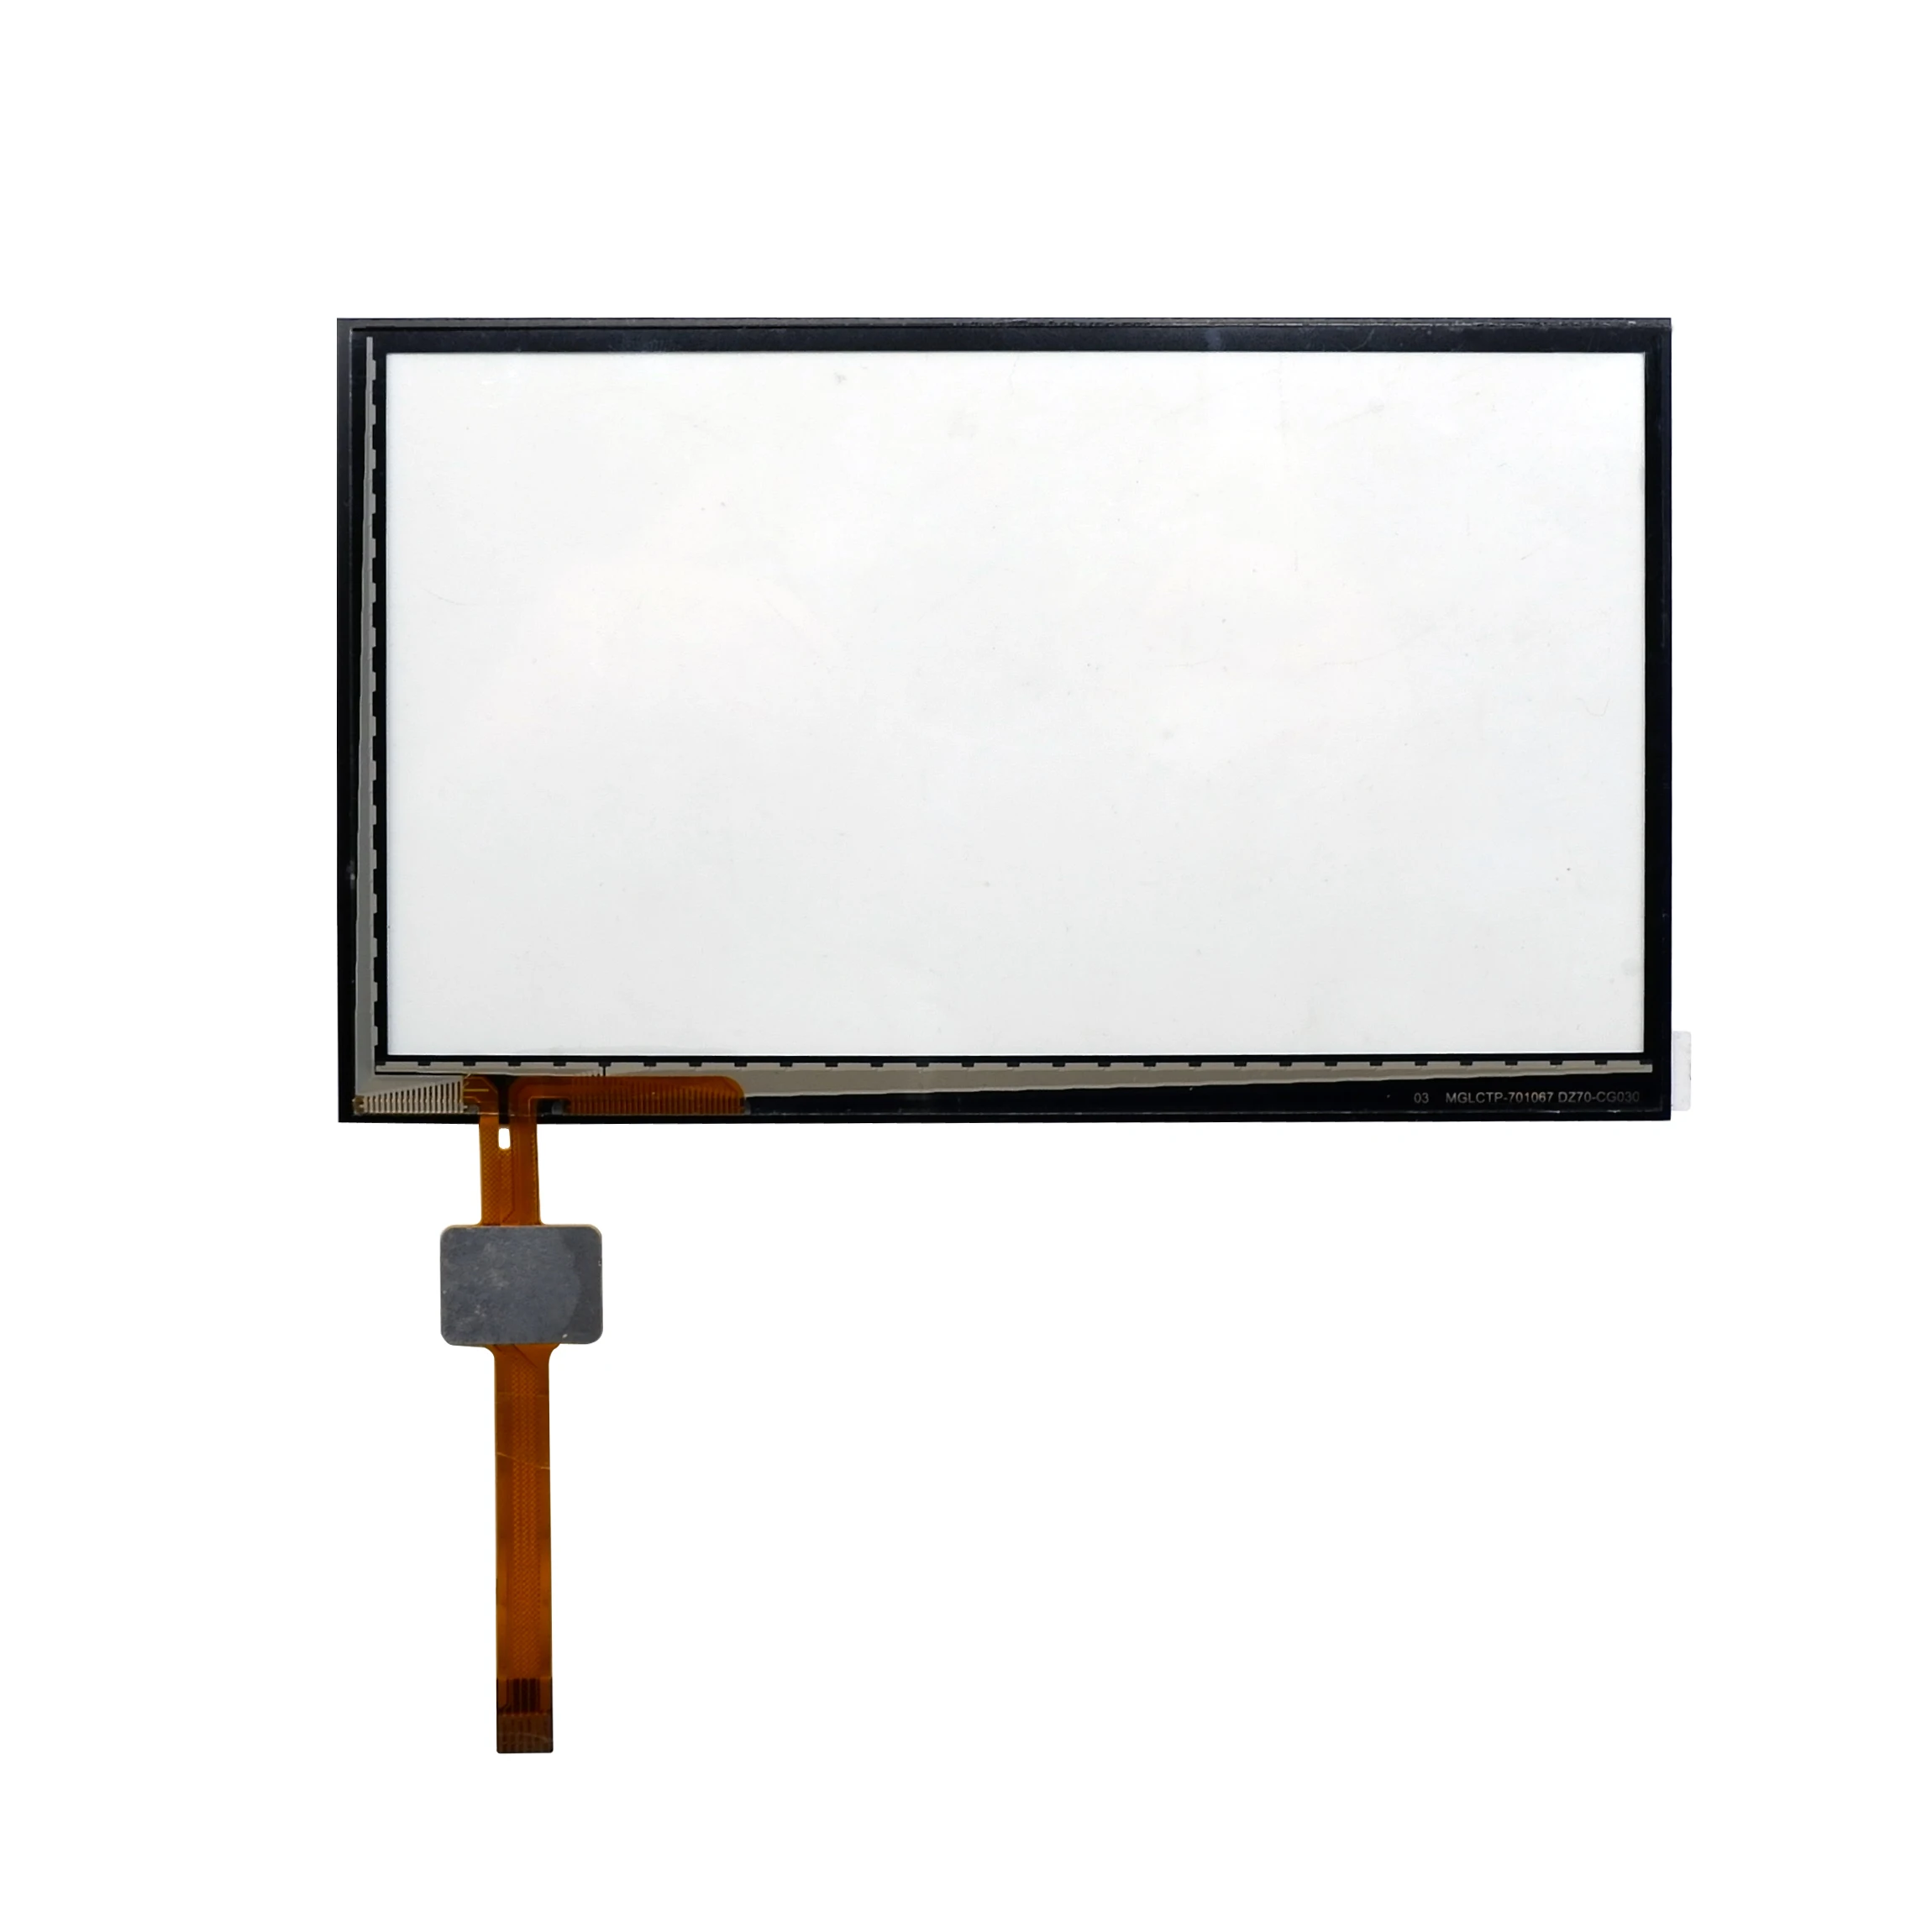 Source OEM TFT LCD Touch Panel Manufacturer 1024x600 7 inch LCD 